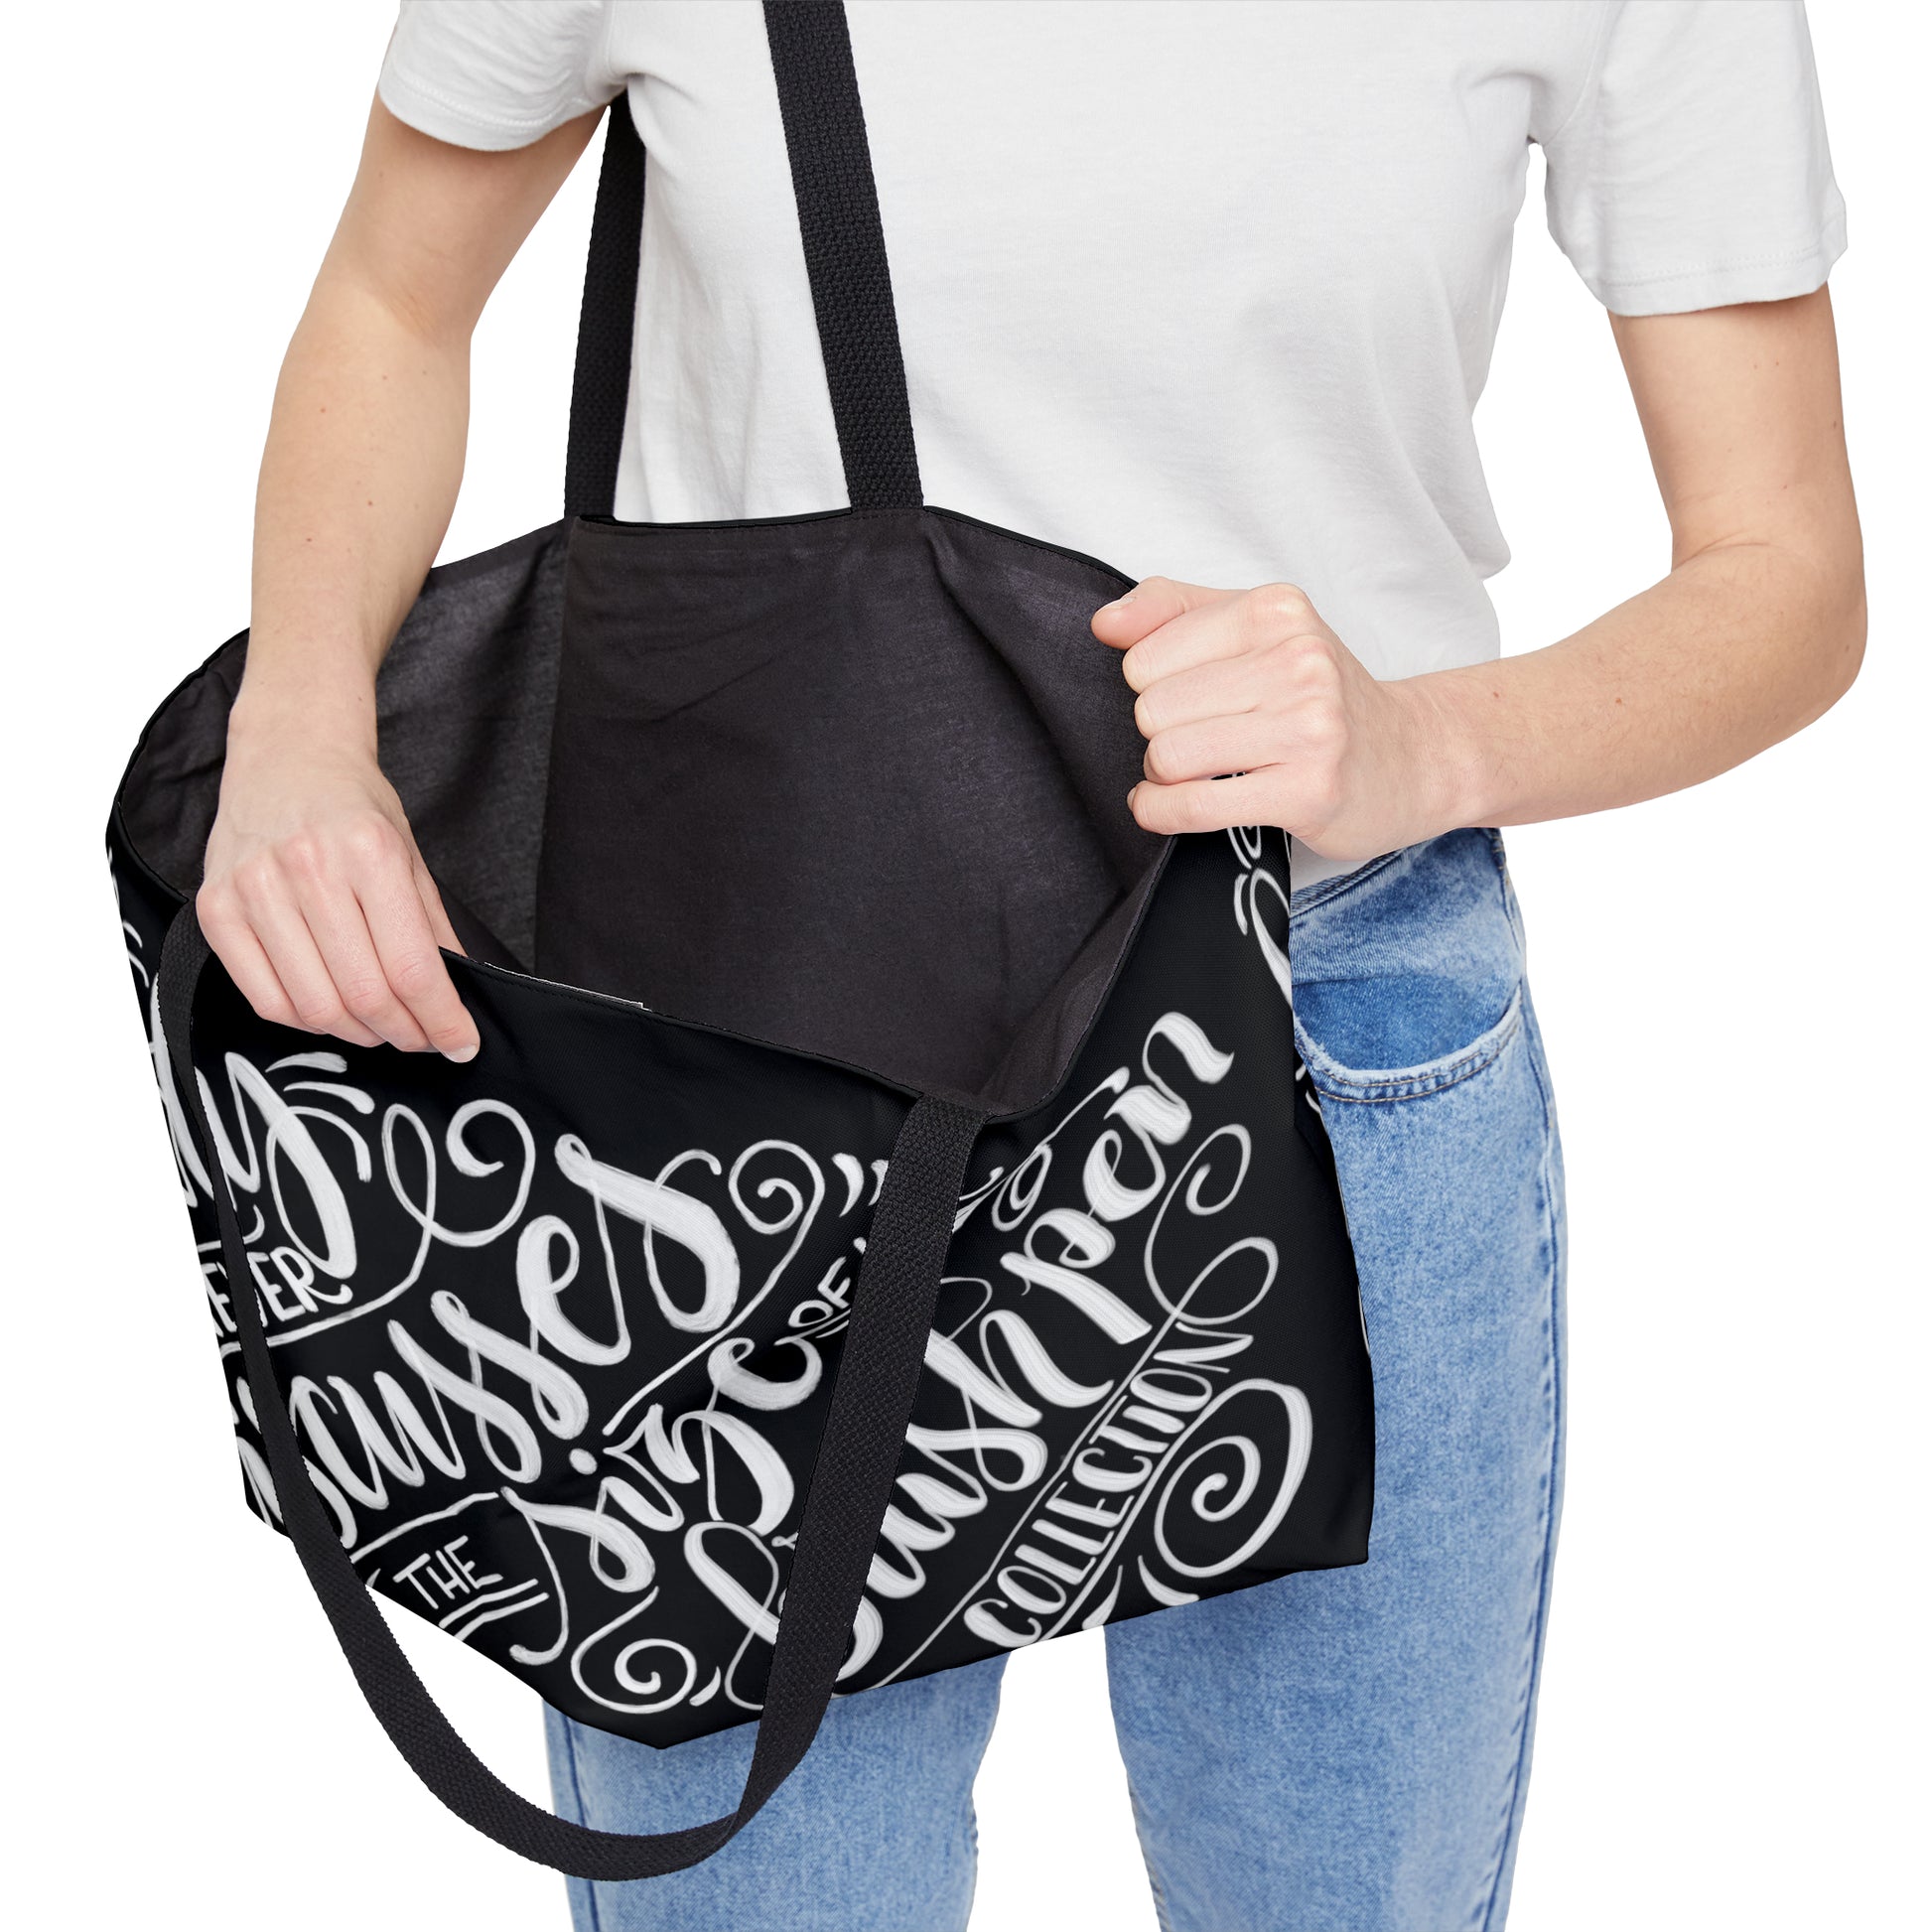 A lady never discusses the size of her brush pen collection - Weekender Tote Bag - howjoyfulshop